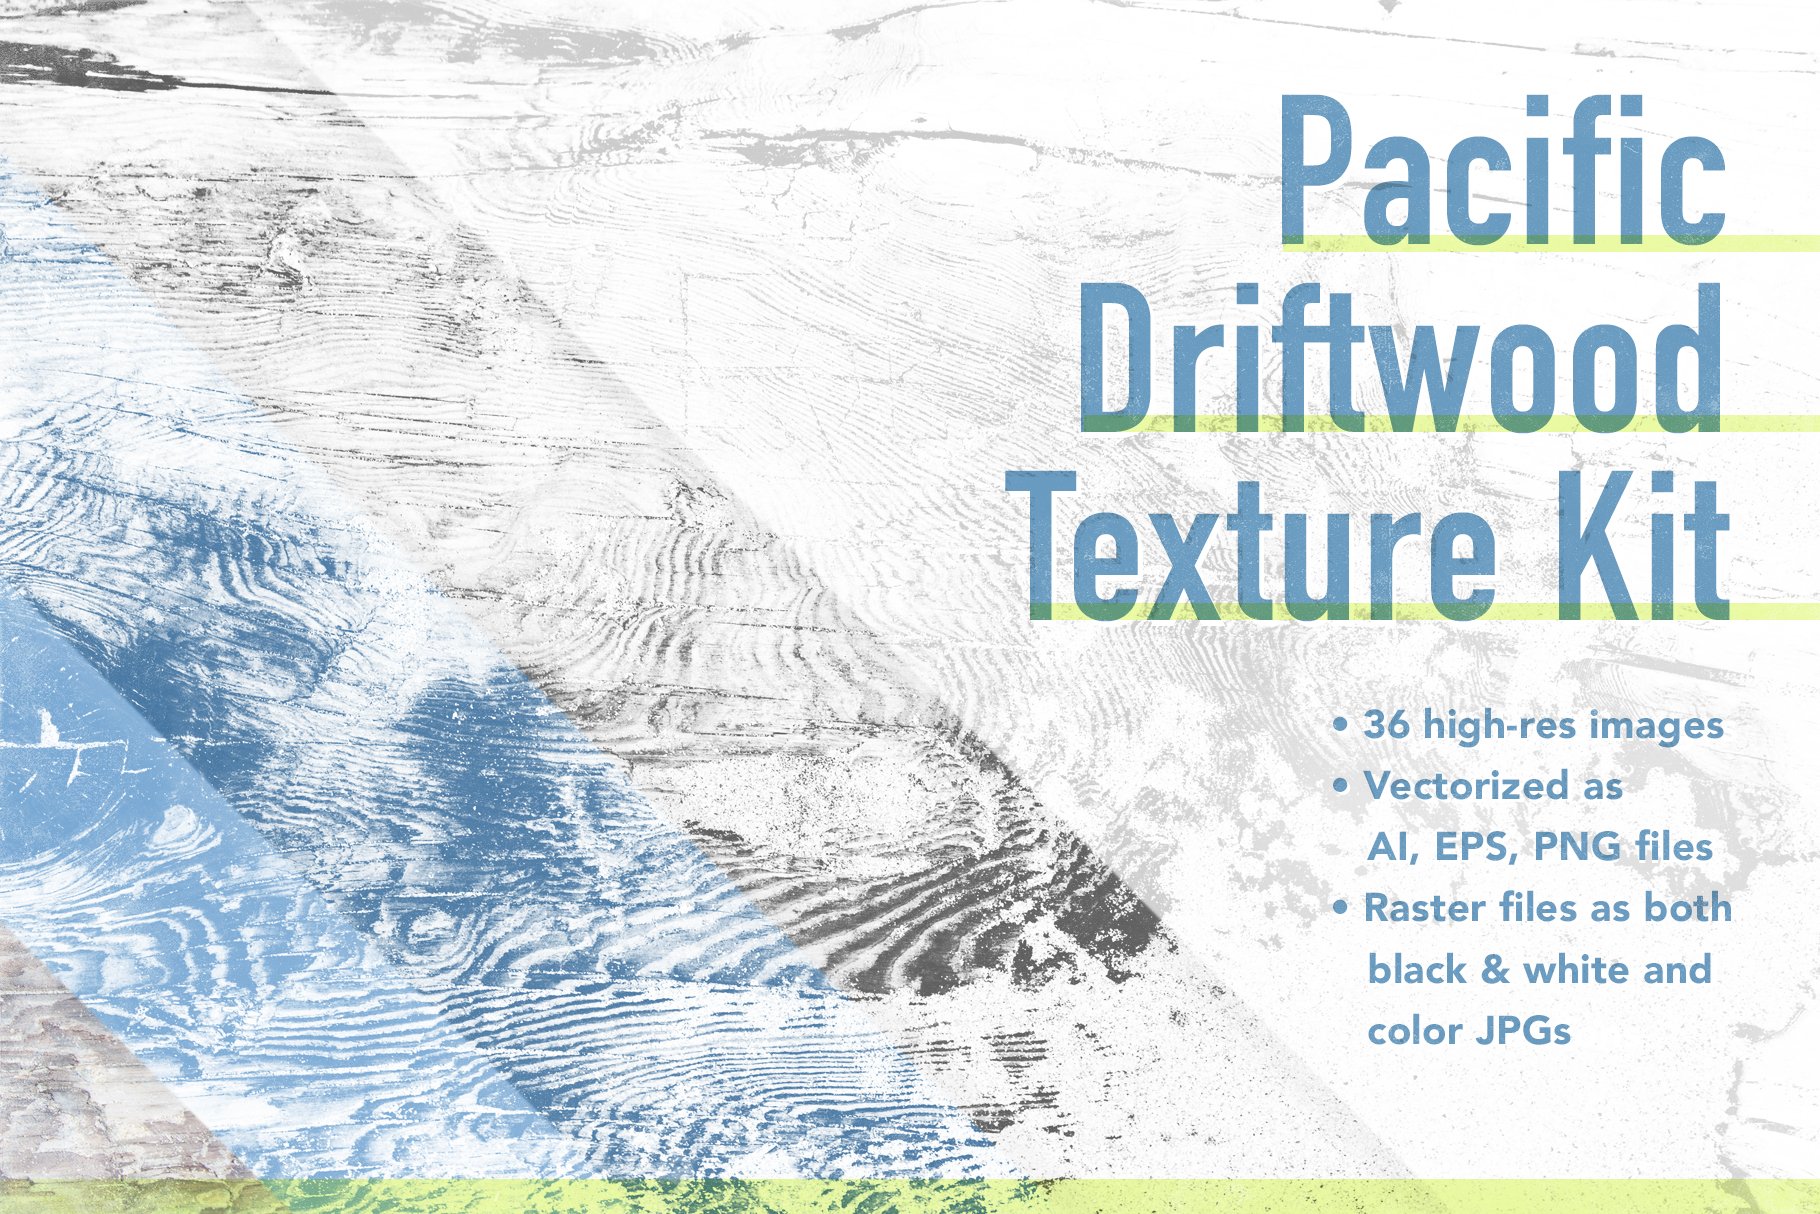 Pacific Driftwood Texture Kit cover image.